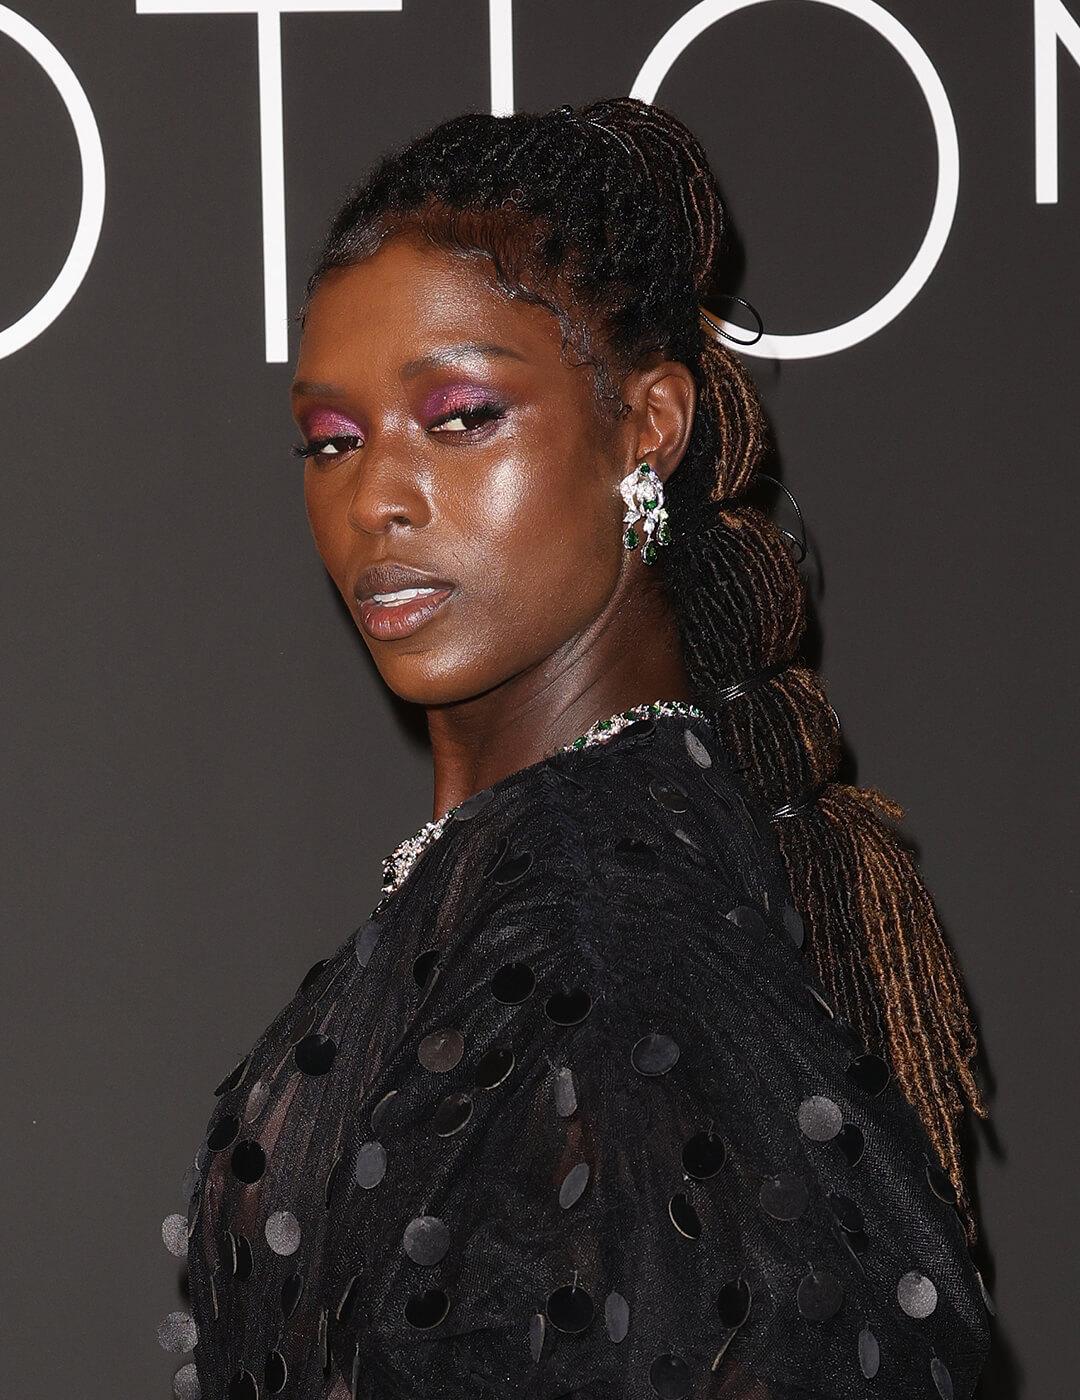 Jodie Turner-Smith looking in braided hairstyle